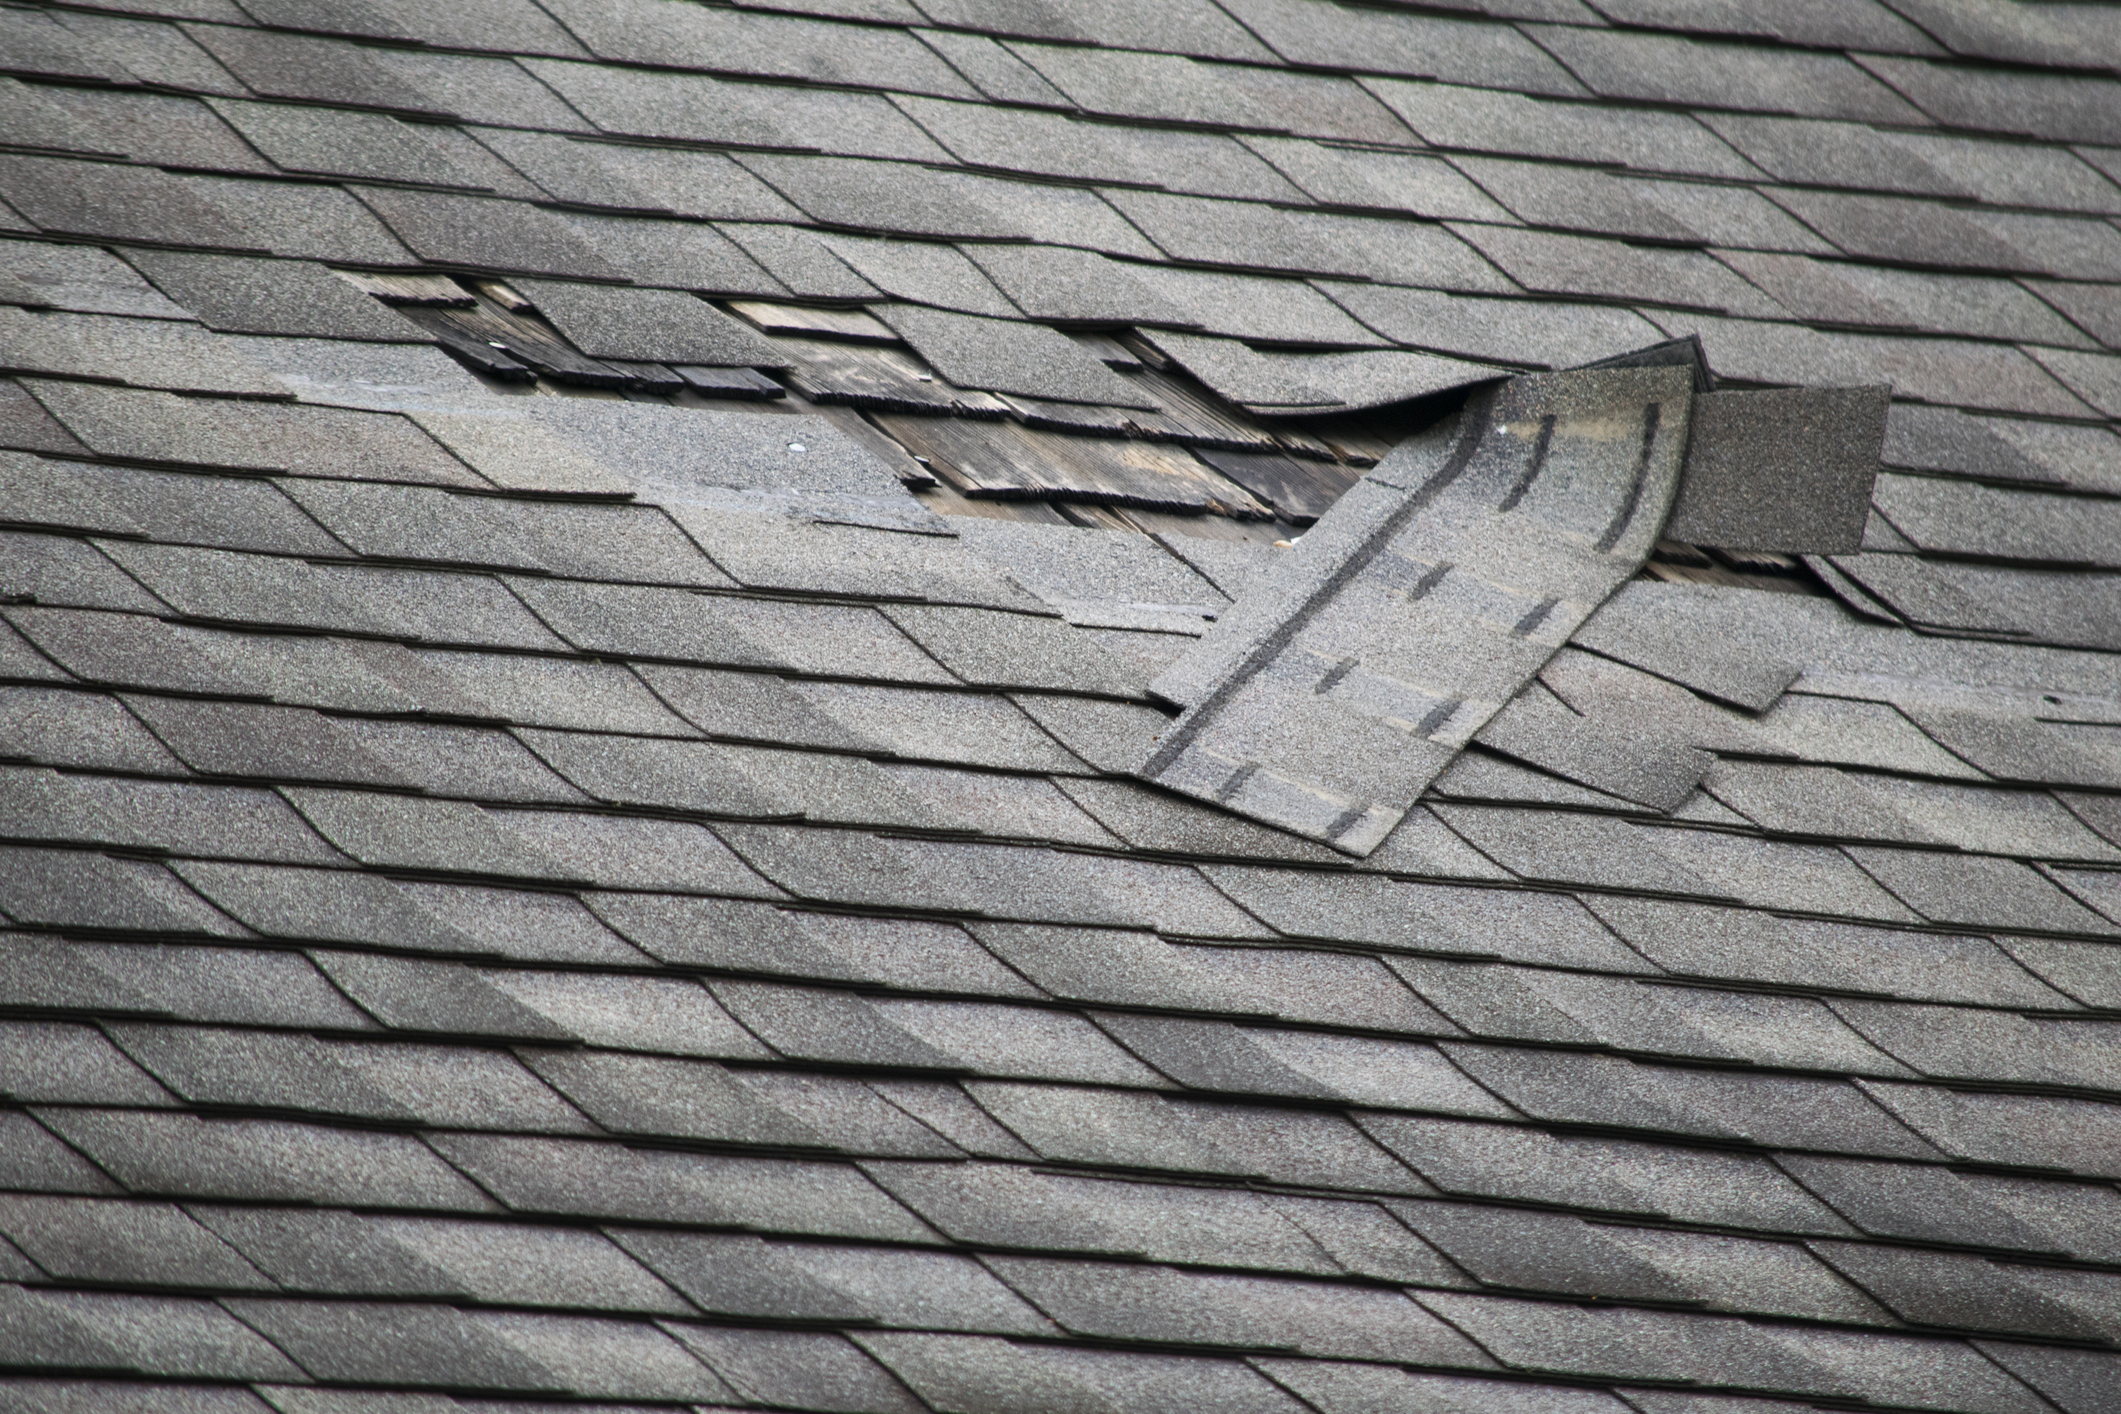 Poor workmanship results in missing shingles on a roof